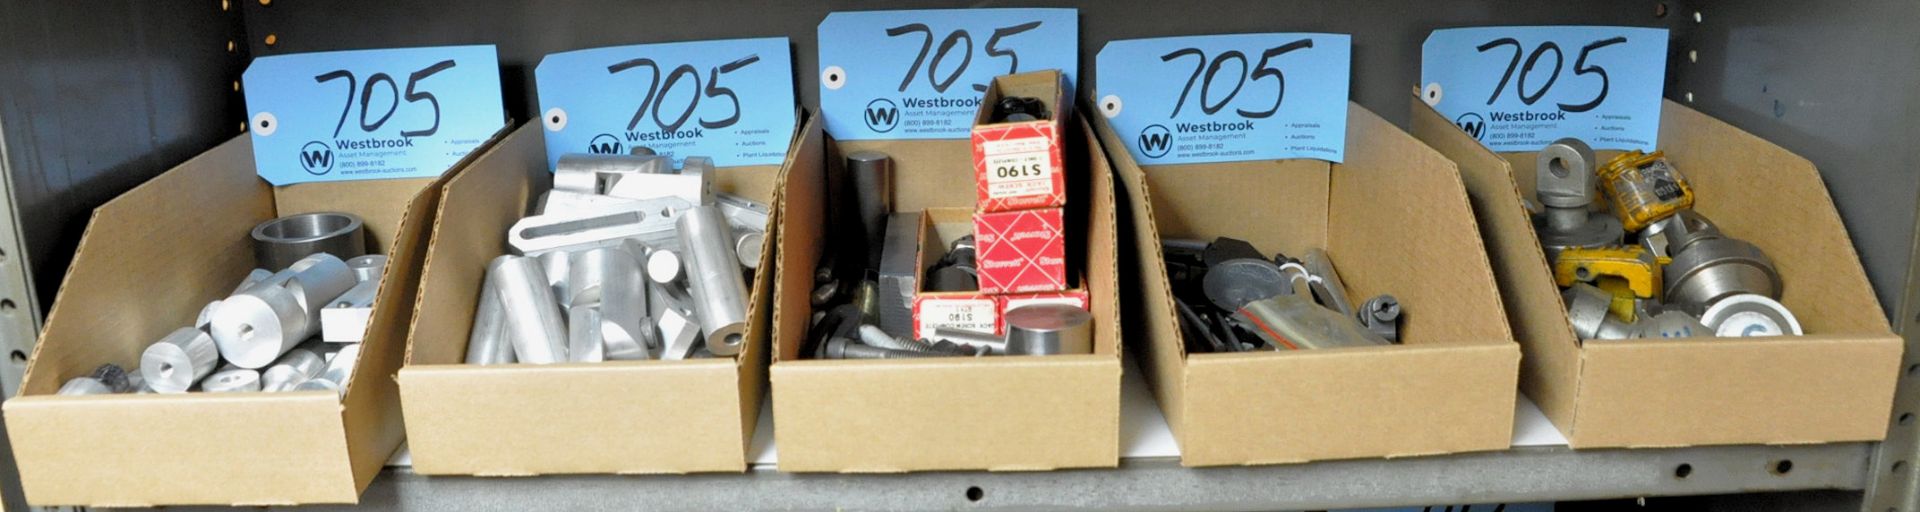 Lot-Various Inspection Tooling in (5) Boxes on (1) Shelf